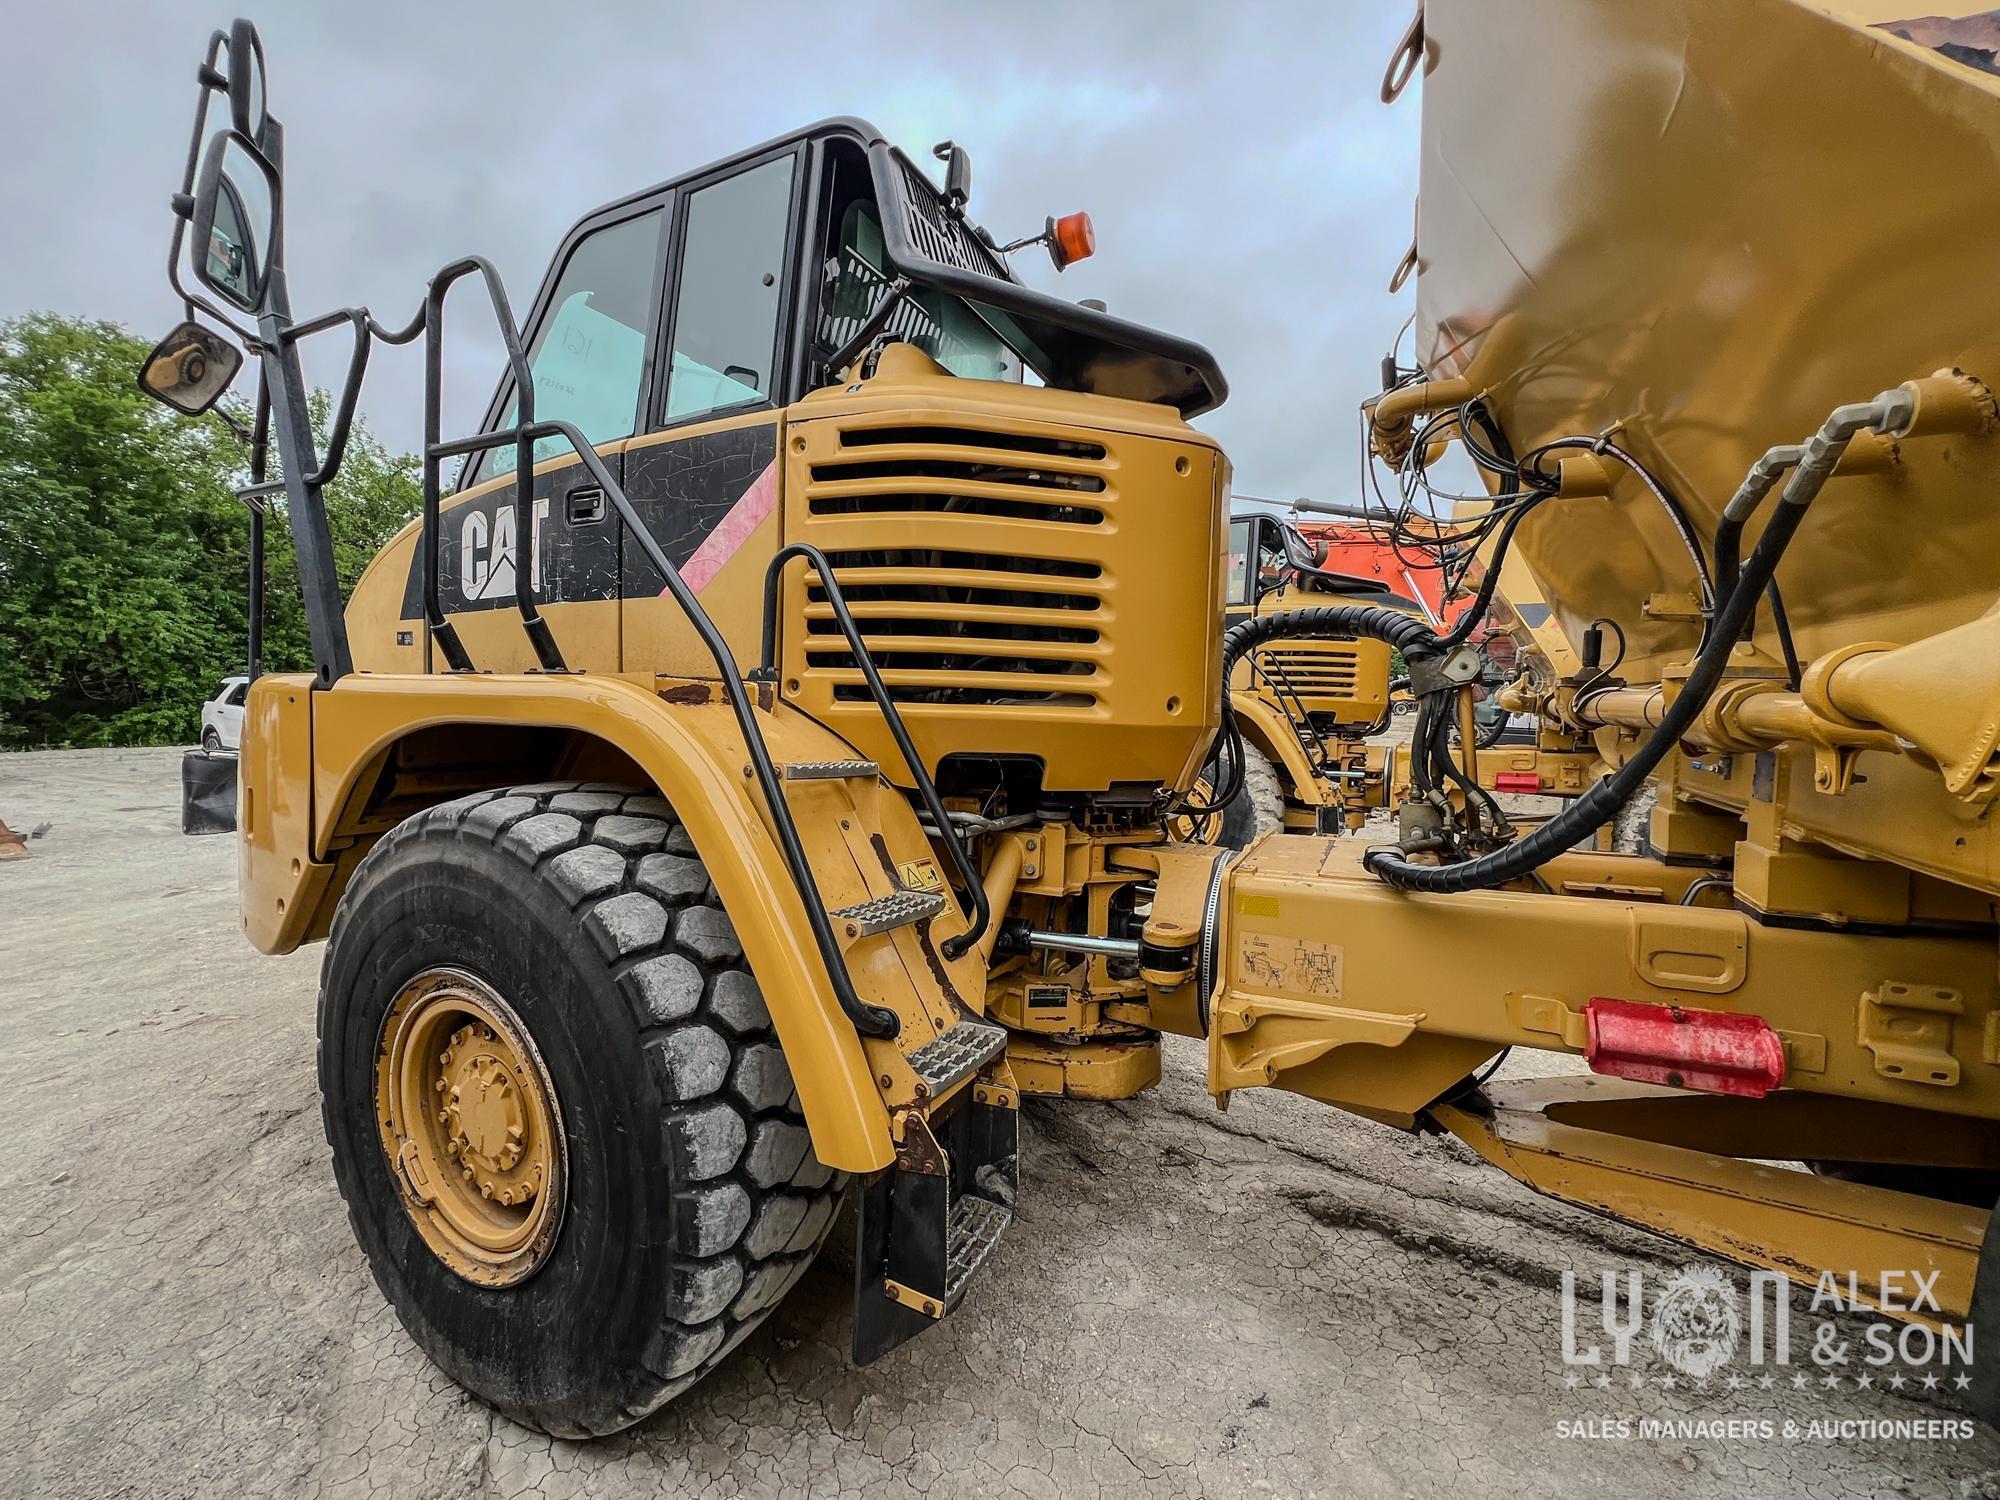 2013 CAT 725 WATER TRUCK SN:CAT00725EB1L03059 6x6, powered by Cat diesel engine, equipped with Cab,